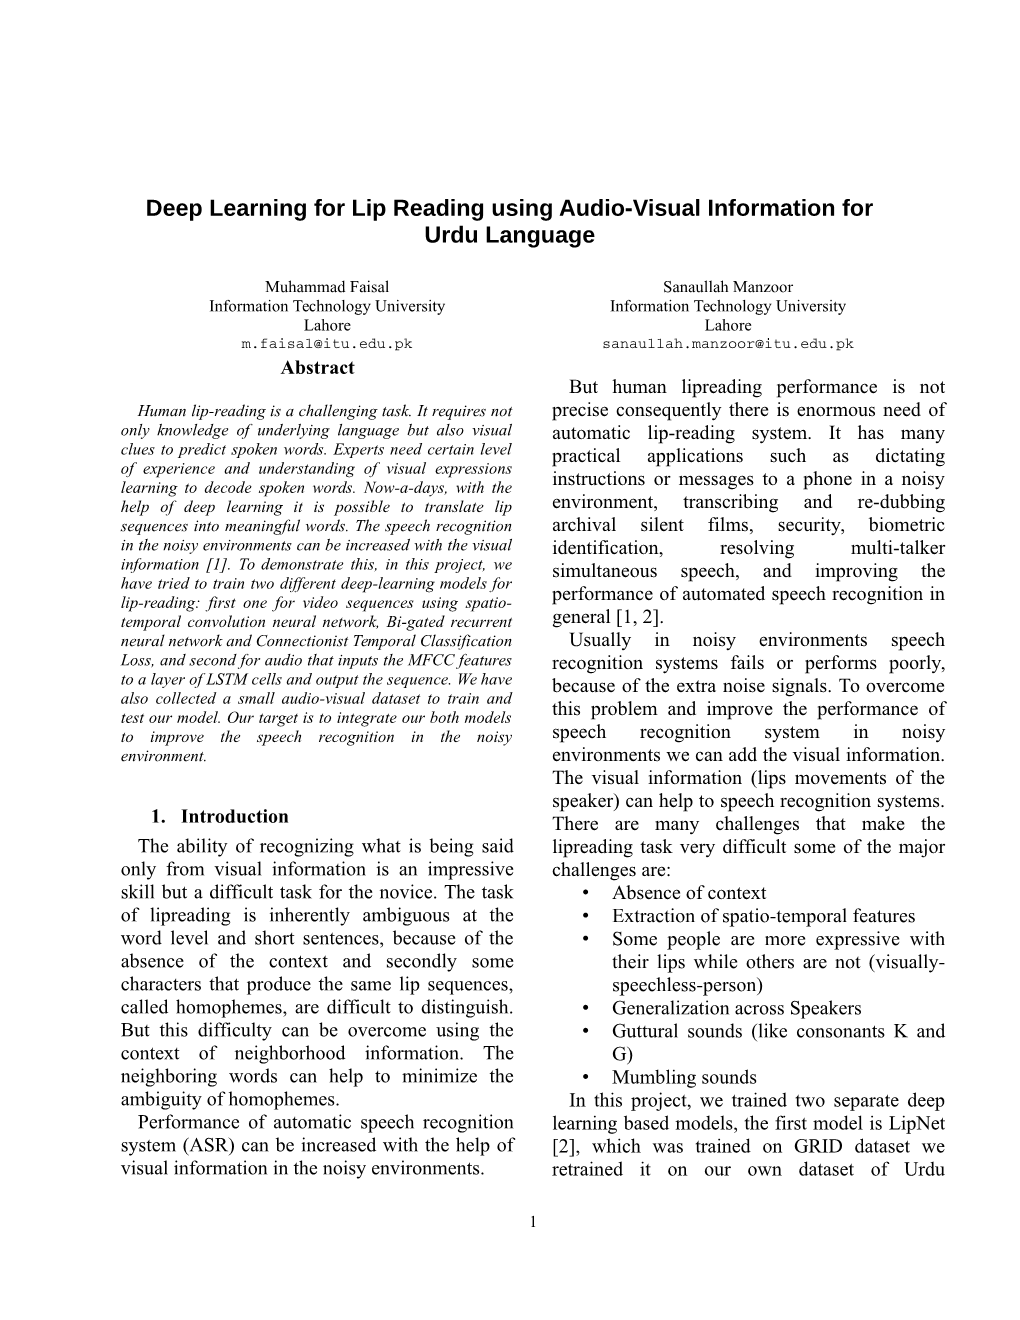 Deep Learning for Lip Reading Using Audio-Visual Information for Urdu Language